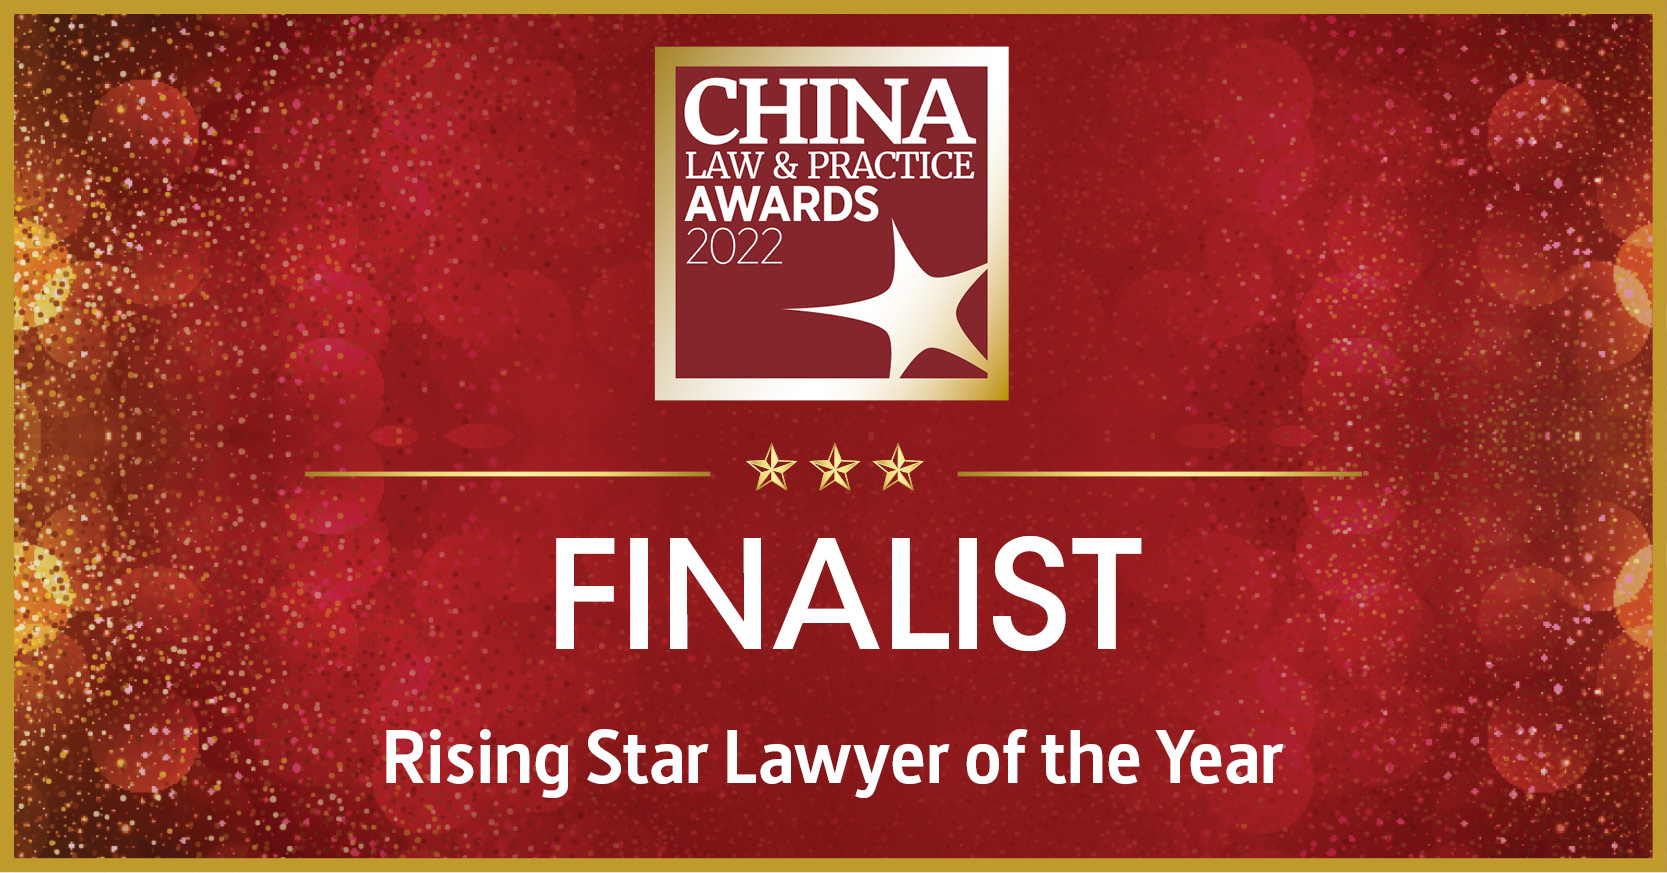 Finalist for Rising Star Lawyer of the Year by China Law & Practice Awards  2022